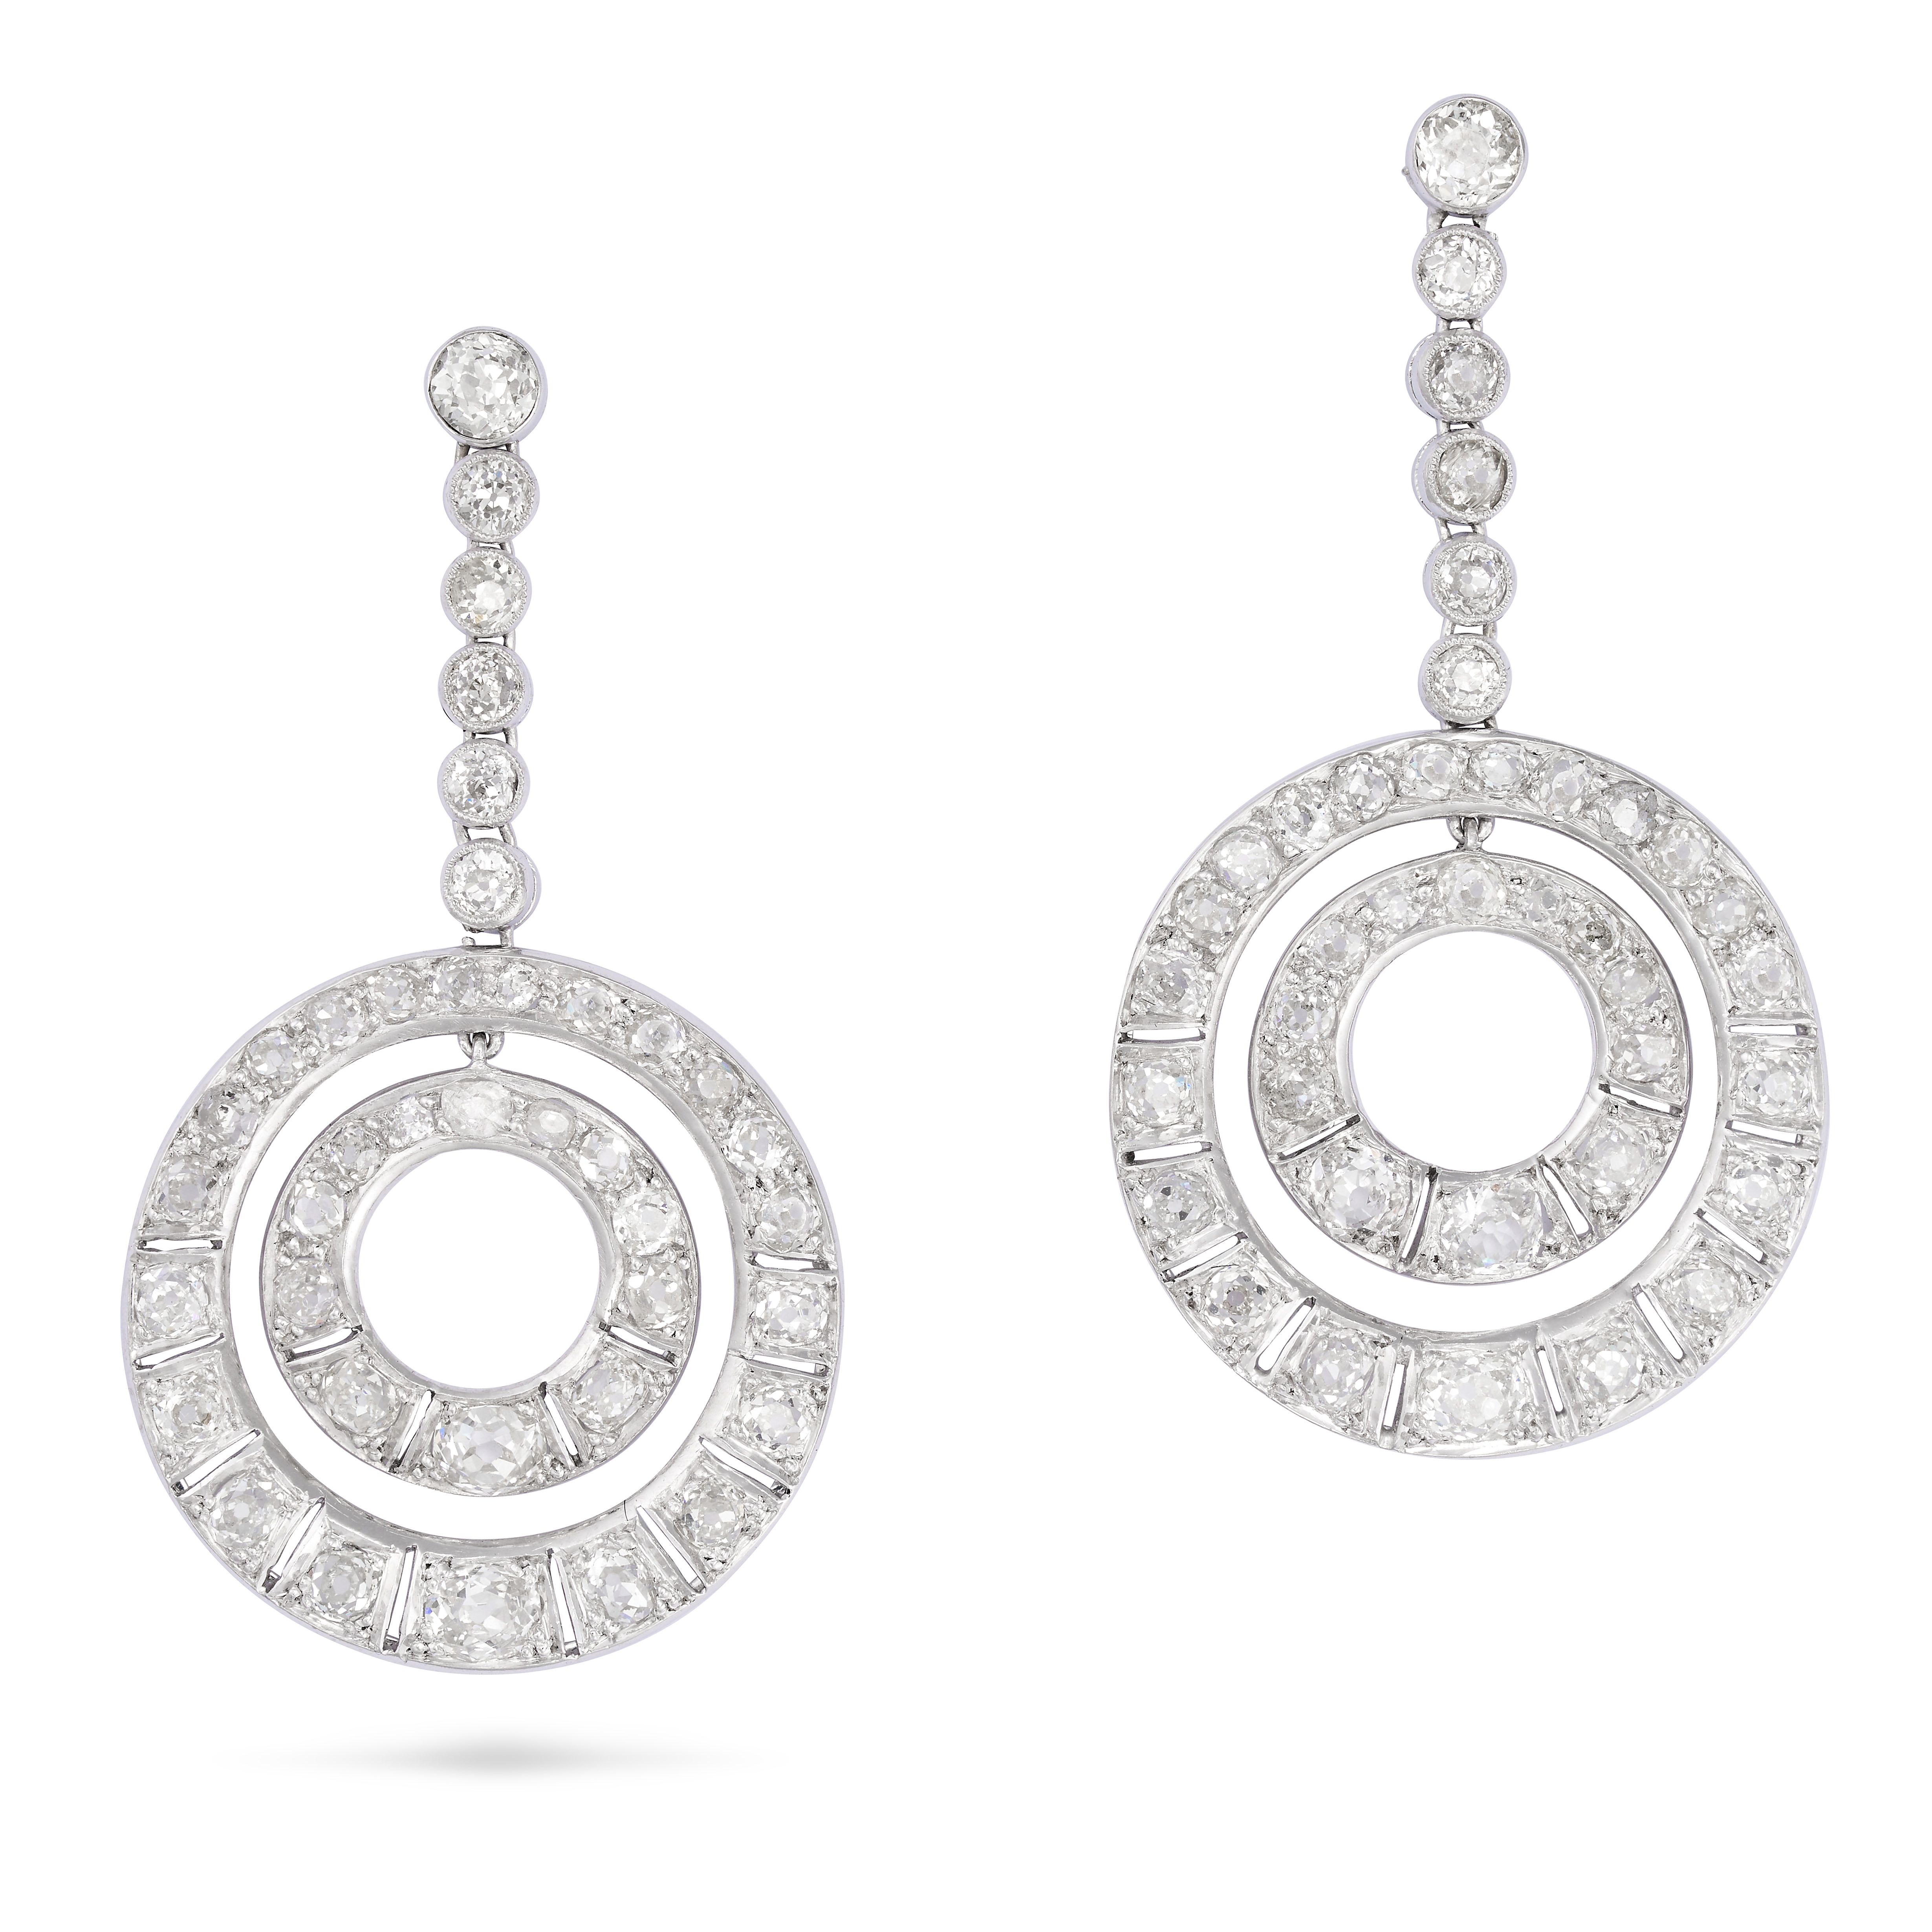 A PAIR OF DIAMOND DROP EARRINGS in 18ct white gold, each set with a row of graduating old cut dia...